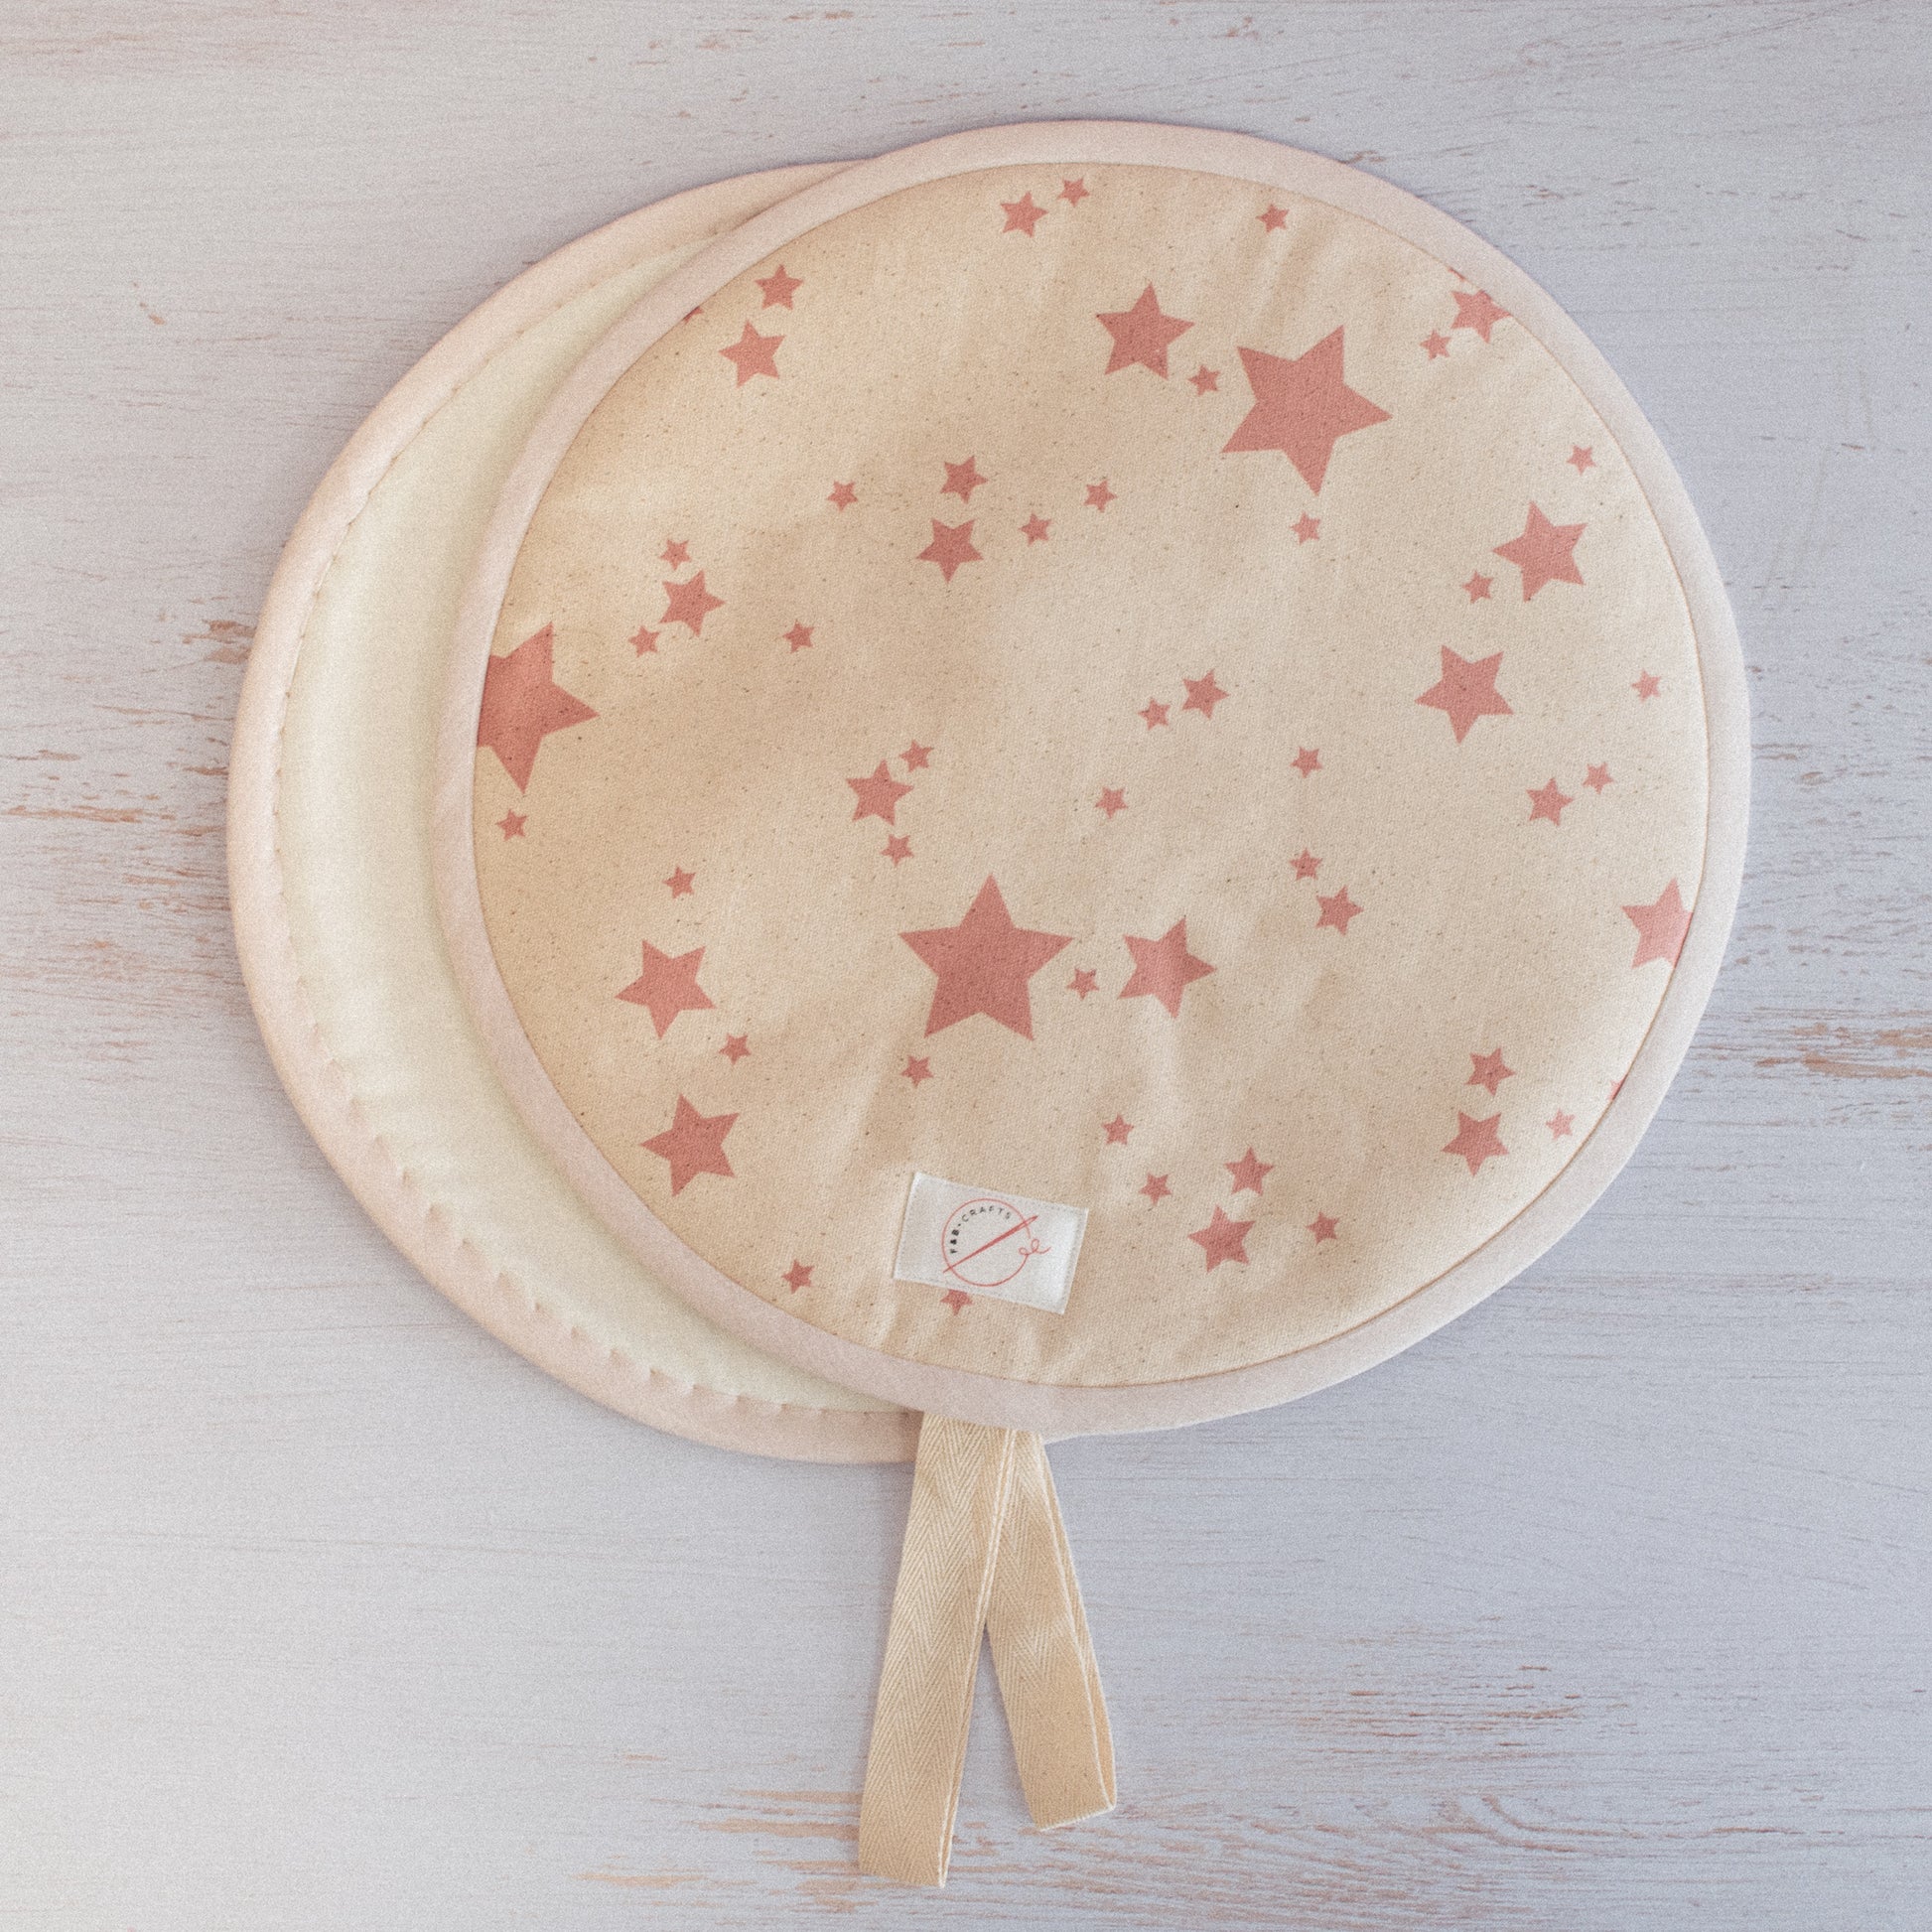 F&B Crafts Pink Stars Hob Covers - Vintage Rustic Style Country Kitchen Decor